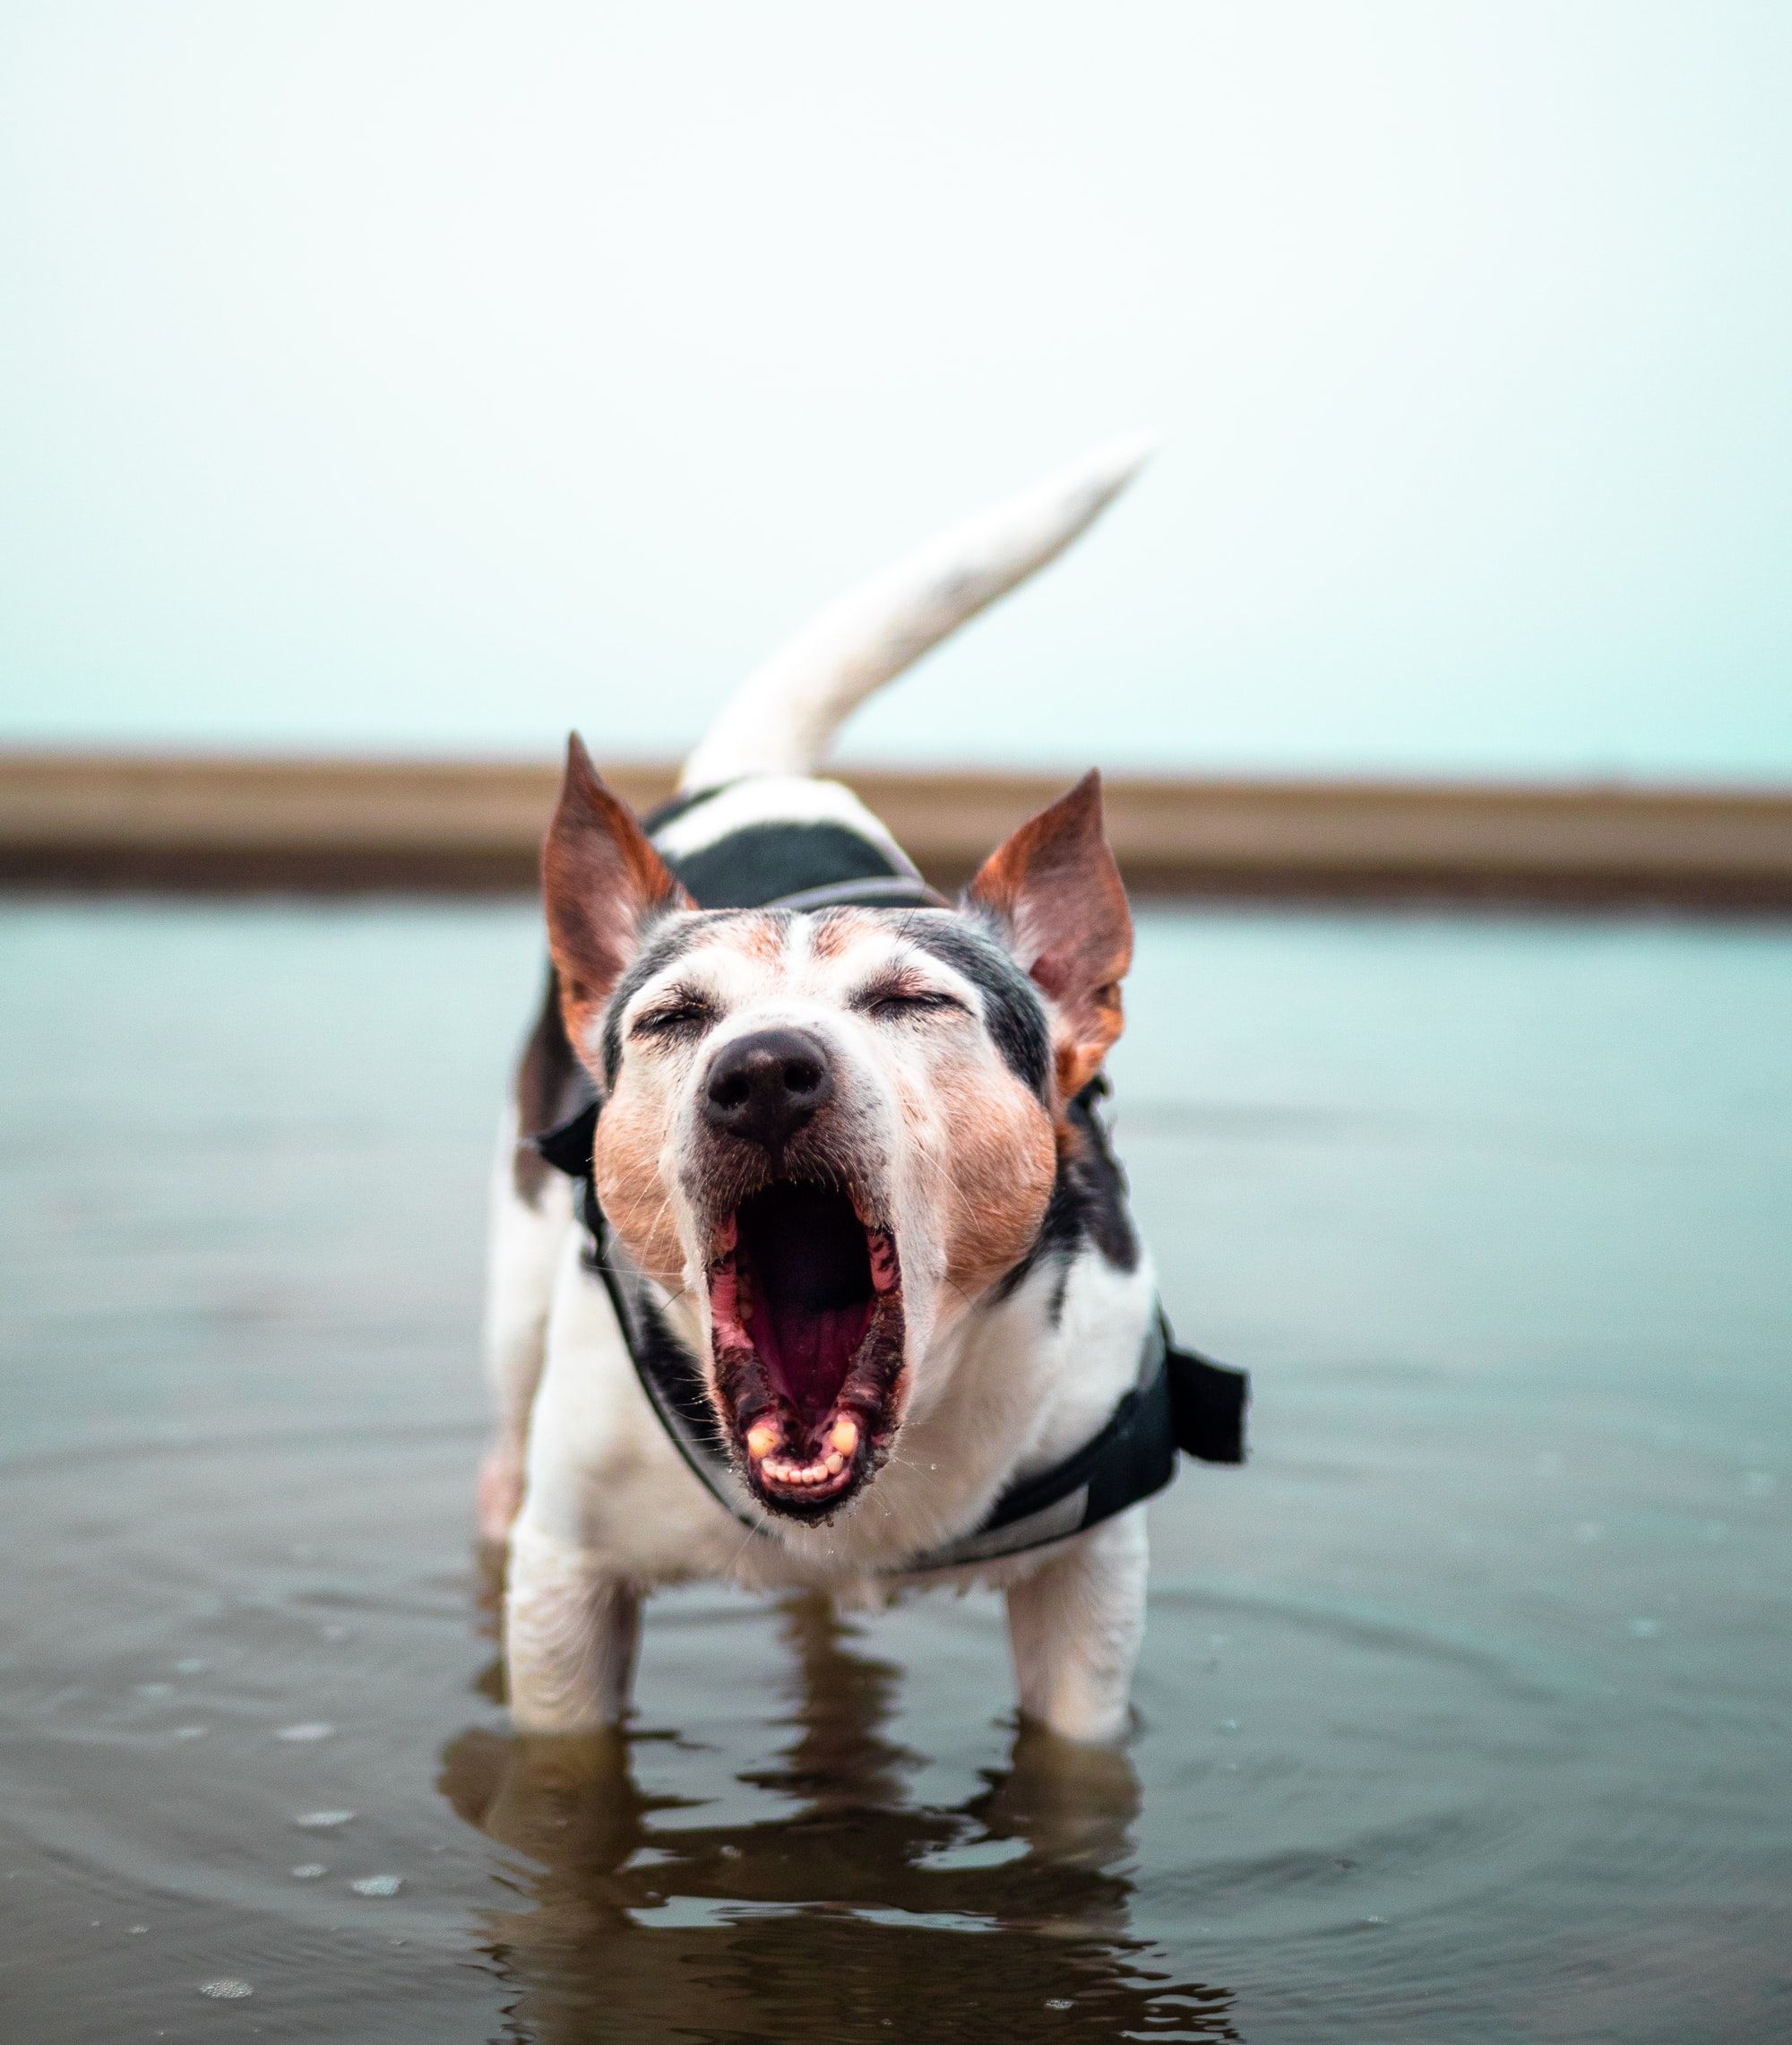 Dog Training With Or: Teach Your Dog To Speak